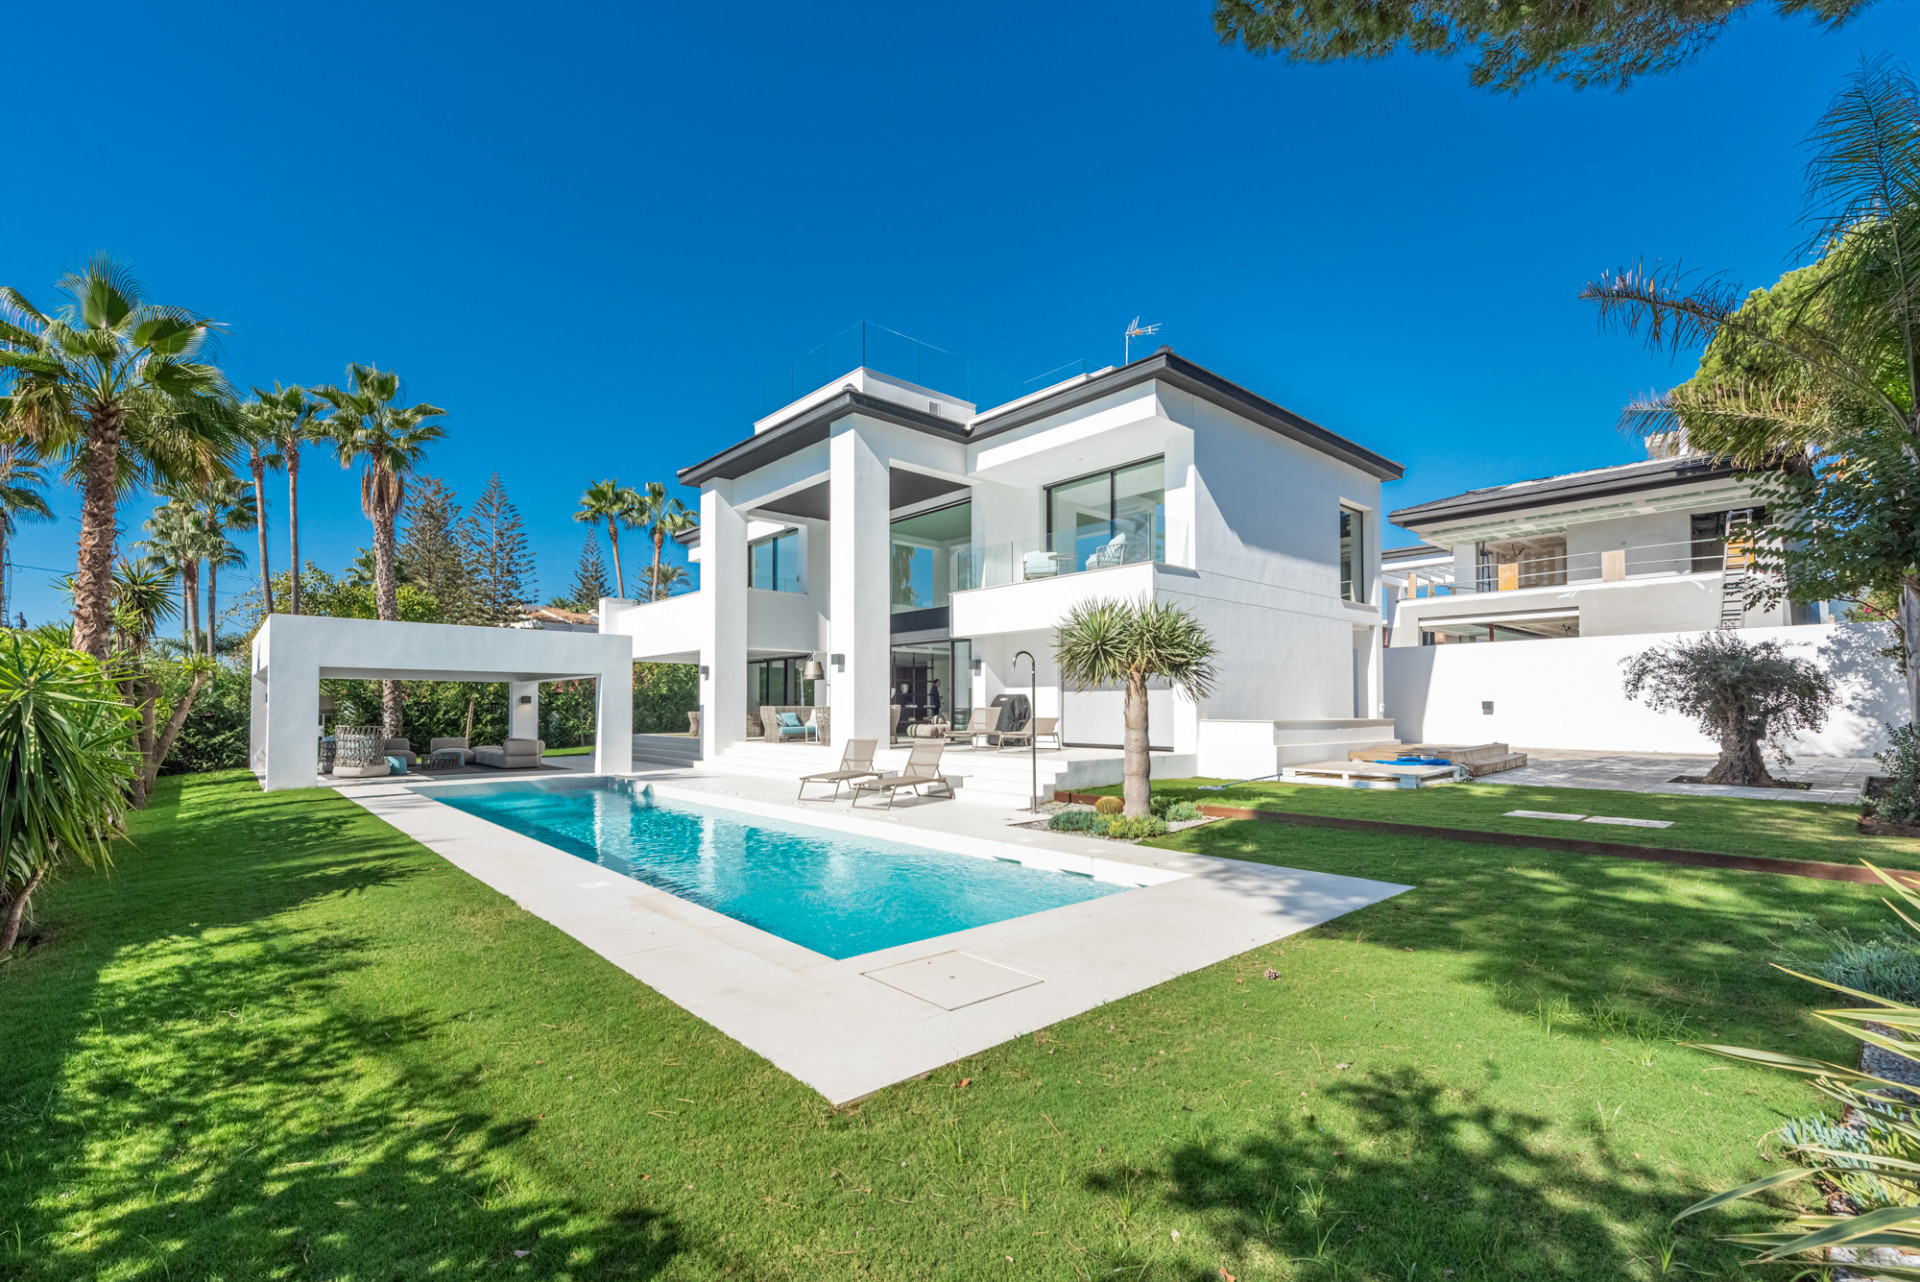 Spectacular villa situated almost front line beach in Cortijo Blanco, close to Puerto Banus.